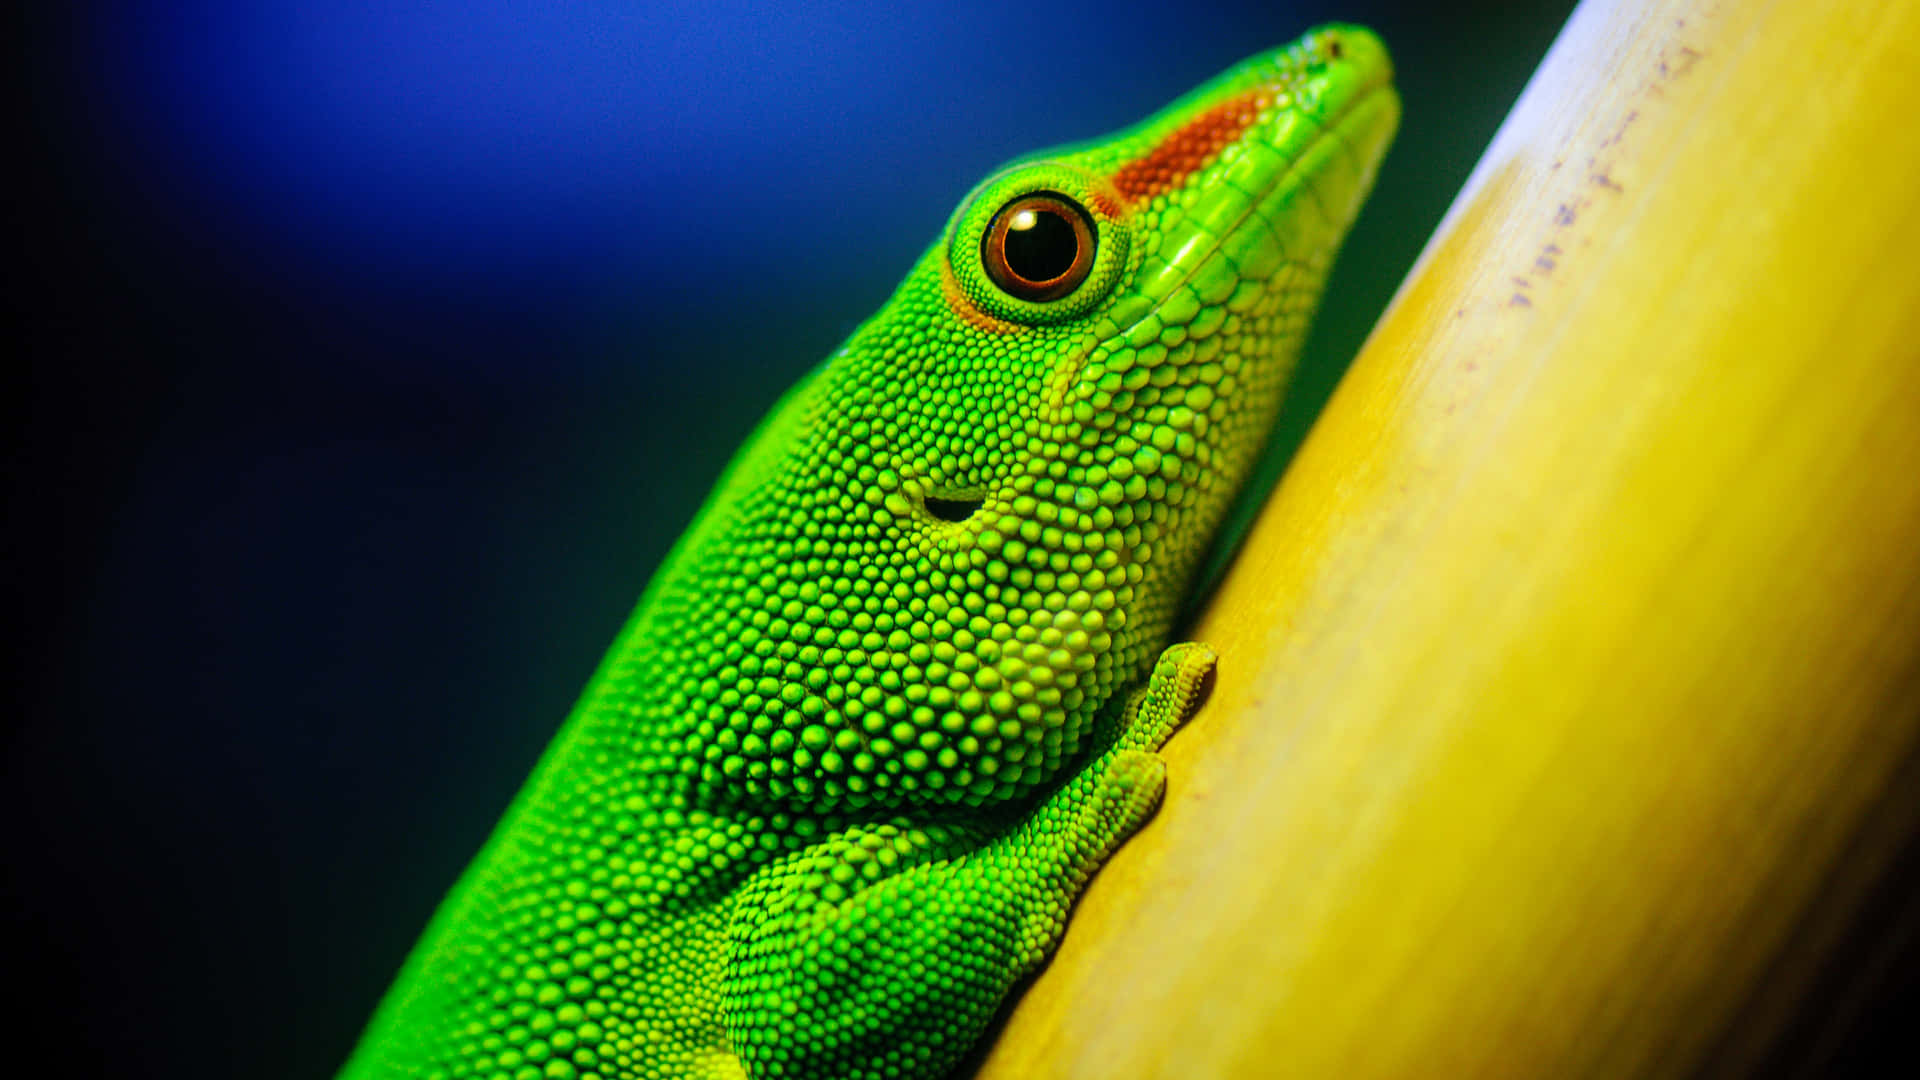 An Up-Close Look at a Reptile